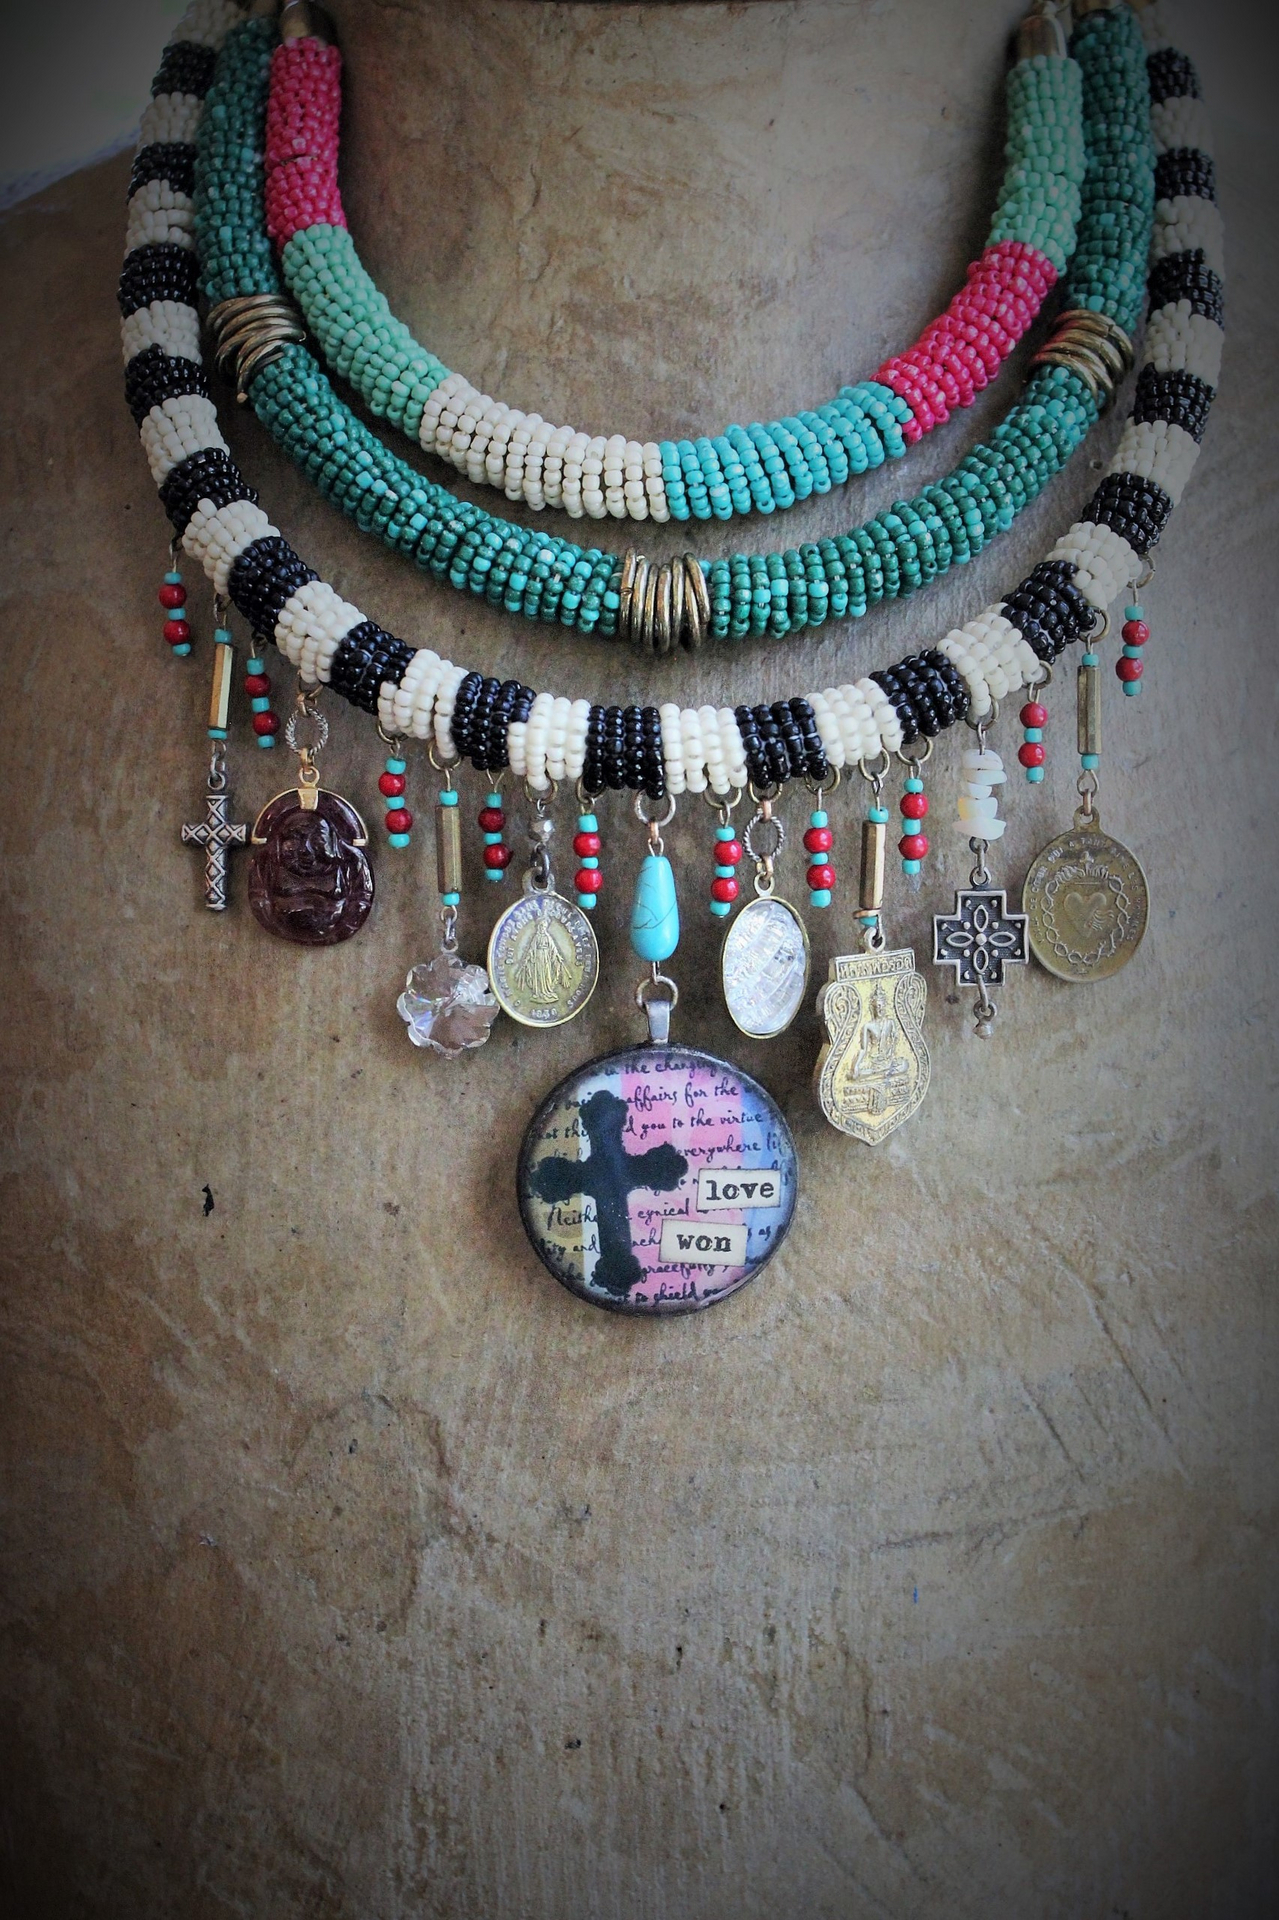 NEW! Peace with your Soul Necklace with Unique 3 Strand Seed Bead Finding,"Love Won" Pendant,Antique French & Tibetan Medals,Carved Tourmaline Buddha & More!